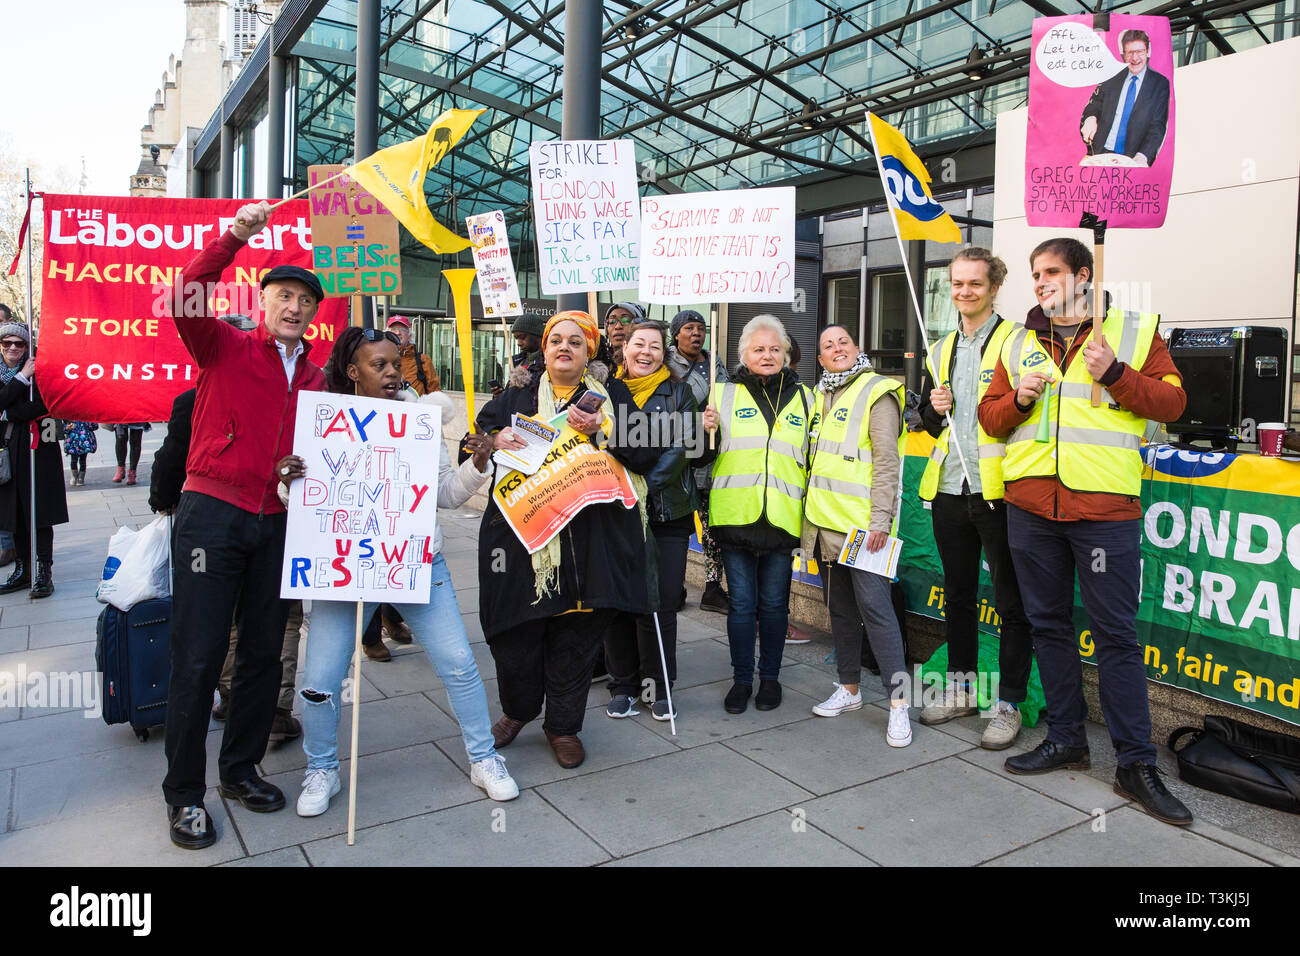 London, UK. 10th April 2019. Outsourced workers belonging to the Public & Commercial Services (PCS) union stand on a picket line outside their place o Stock Photo